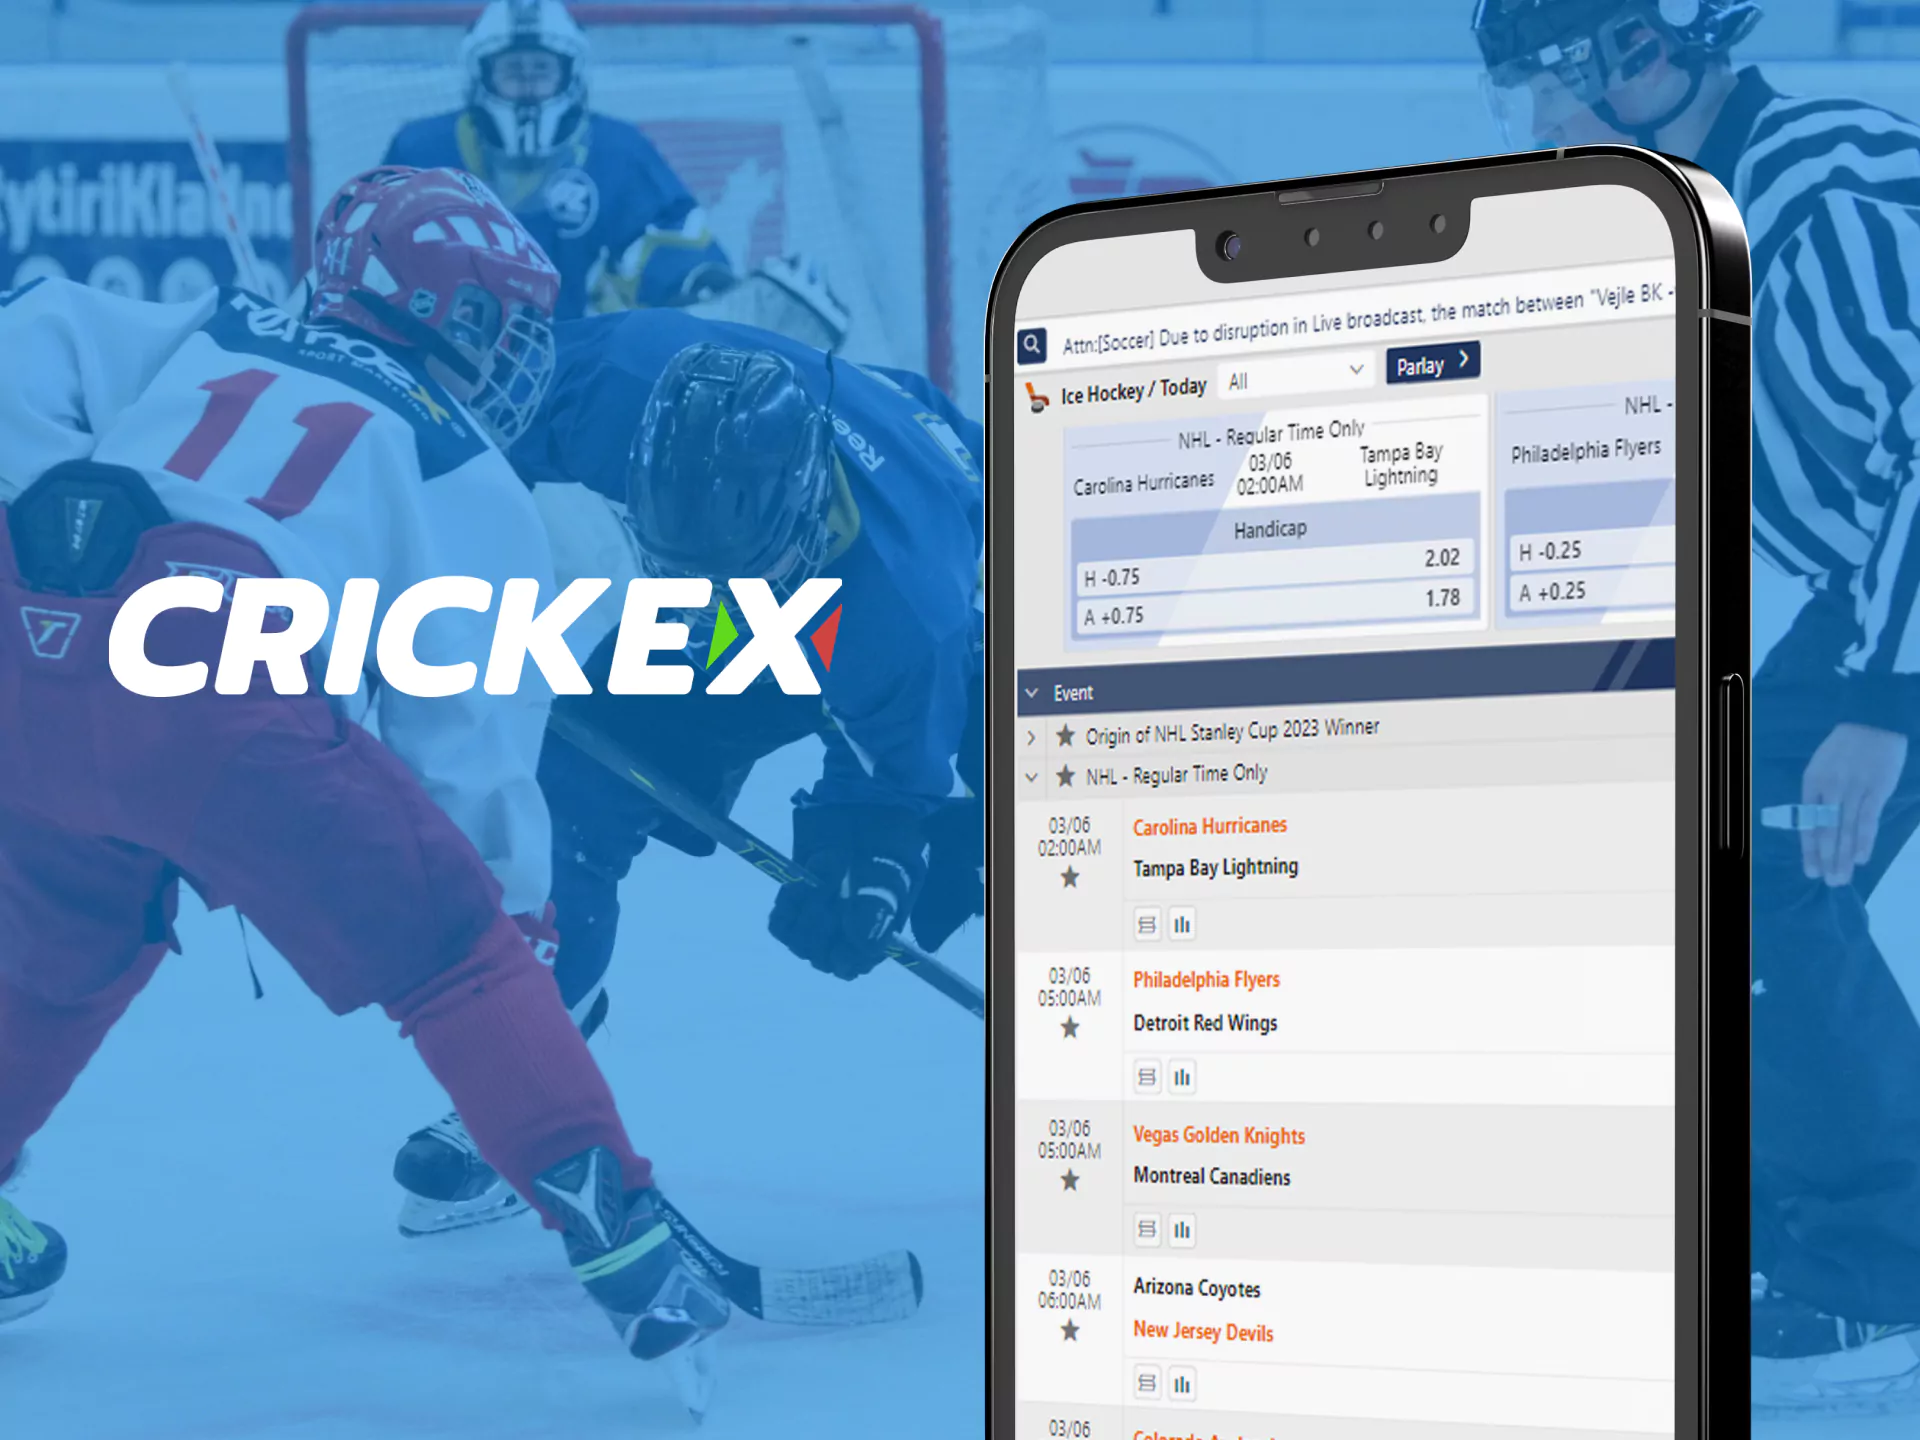 For hockey betting, you can use Crickex on your phone.